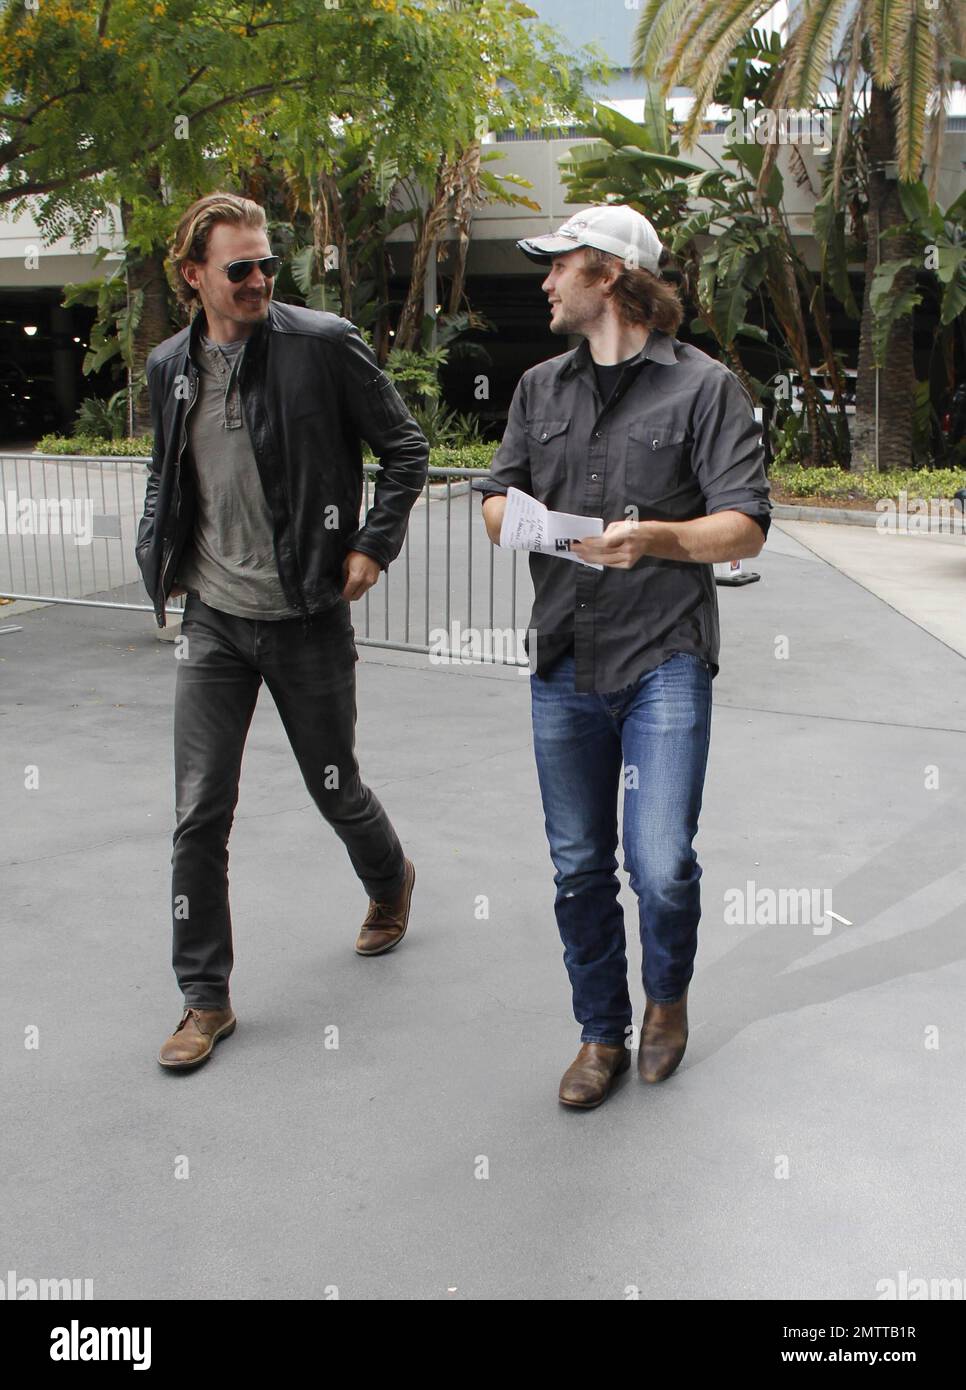 Actor Taylor Kitsch is spotted arriving at the Staples Center with a friend  to watch the LA Kings hockey game. Los Angeles, CA. May 24, 2014 Stock  Photo - Alamy